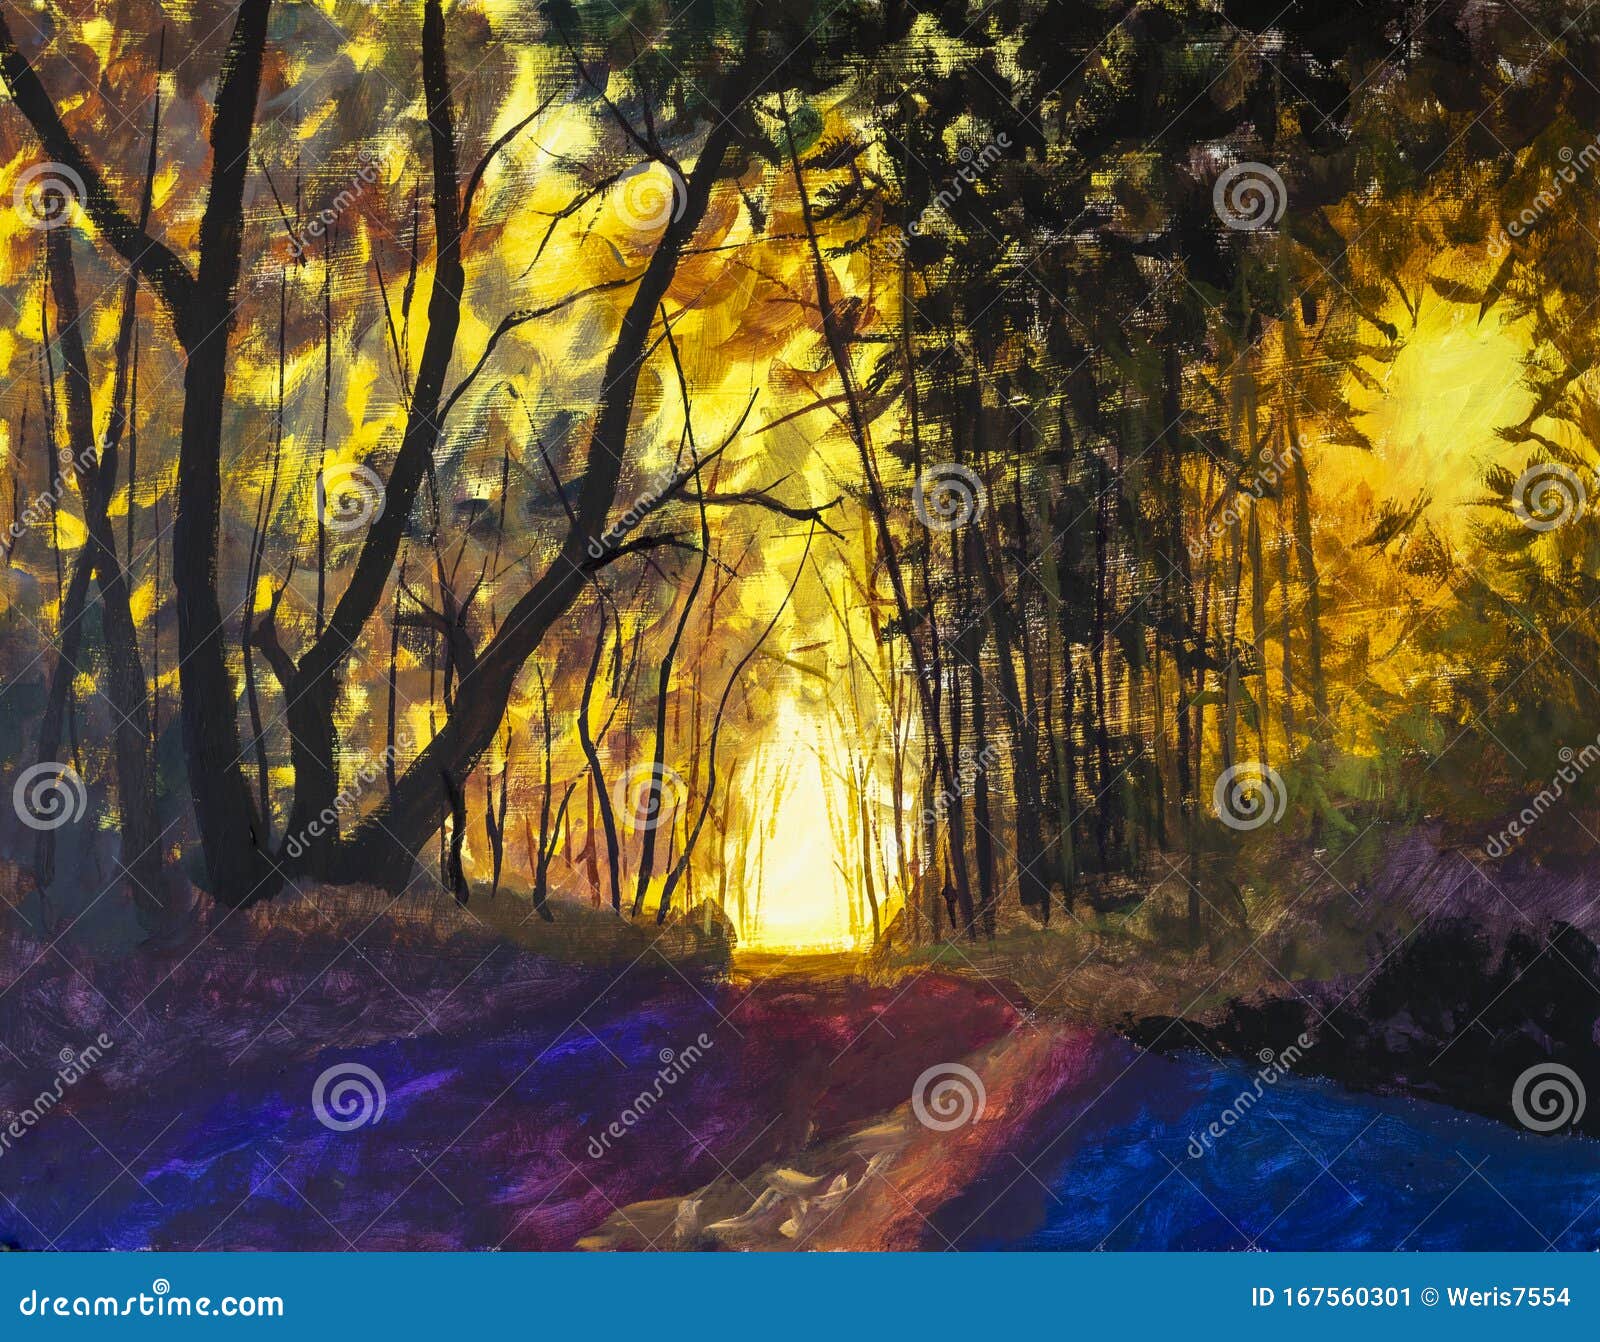 Painting Sunny Forest in Autumn Stock Image - Image of october, foliage ...